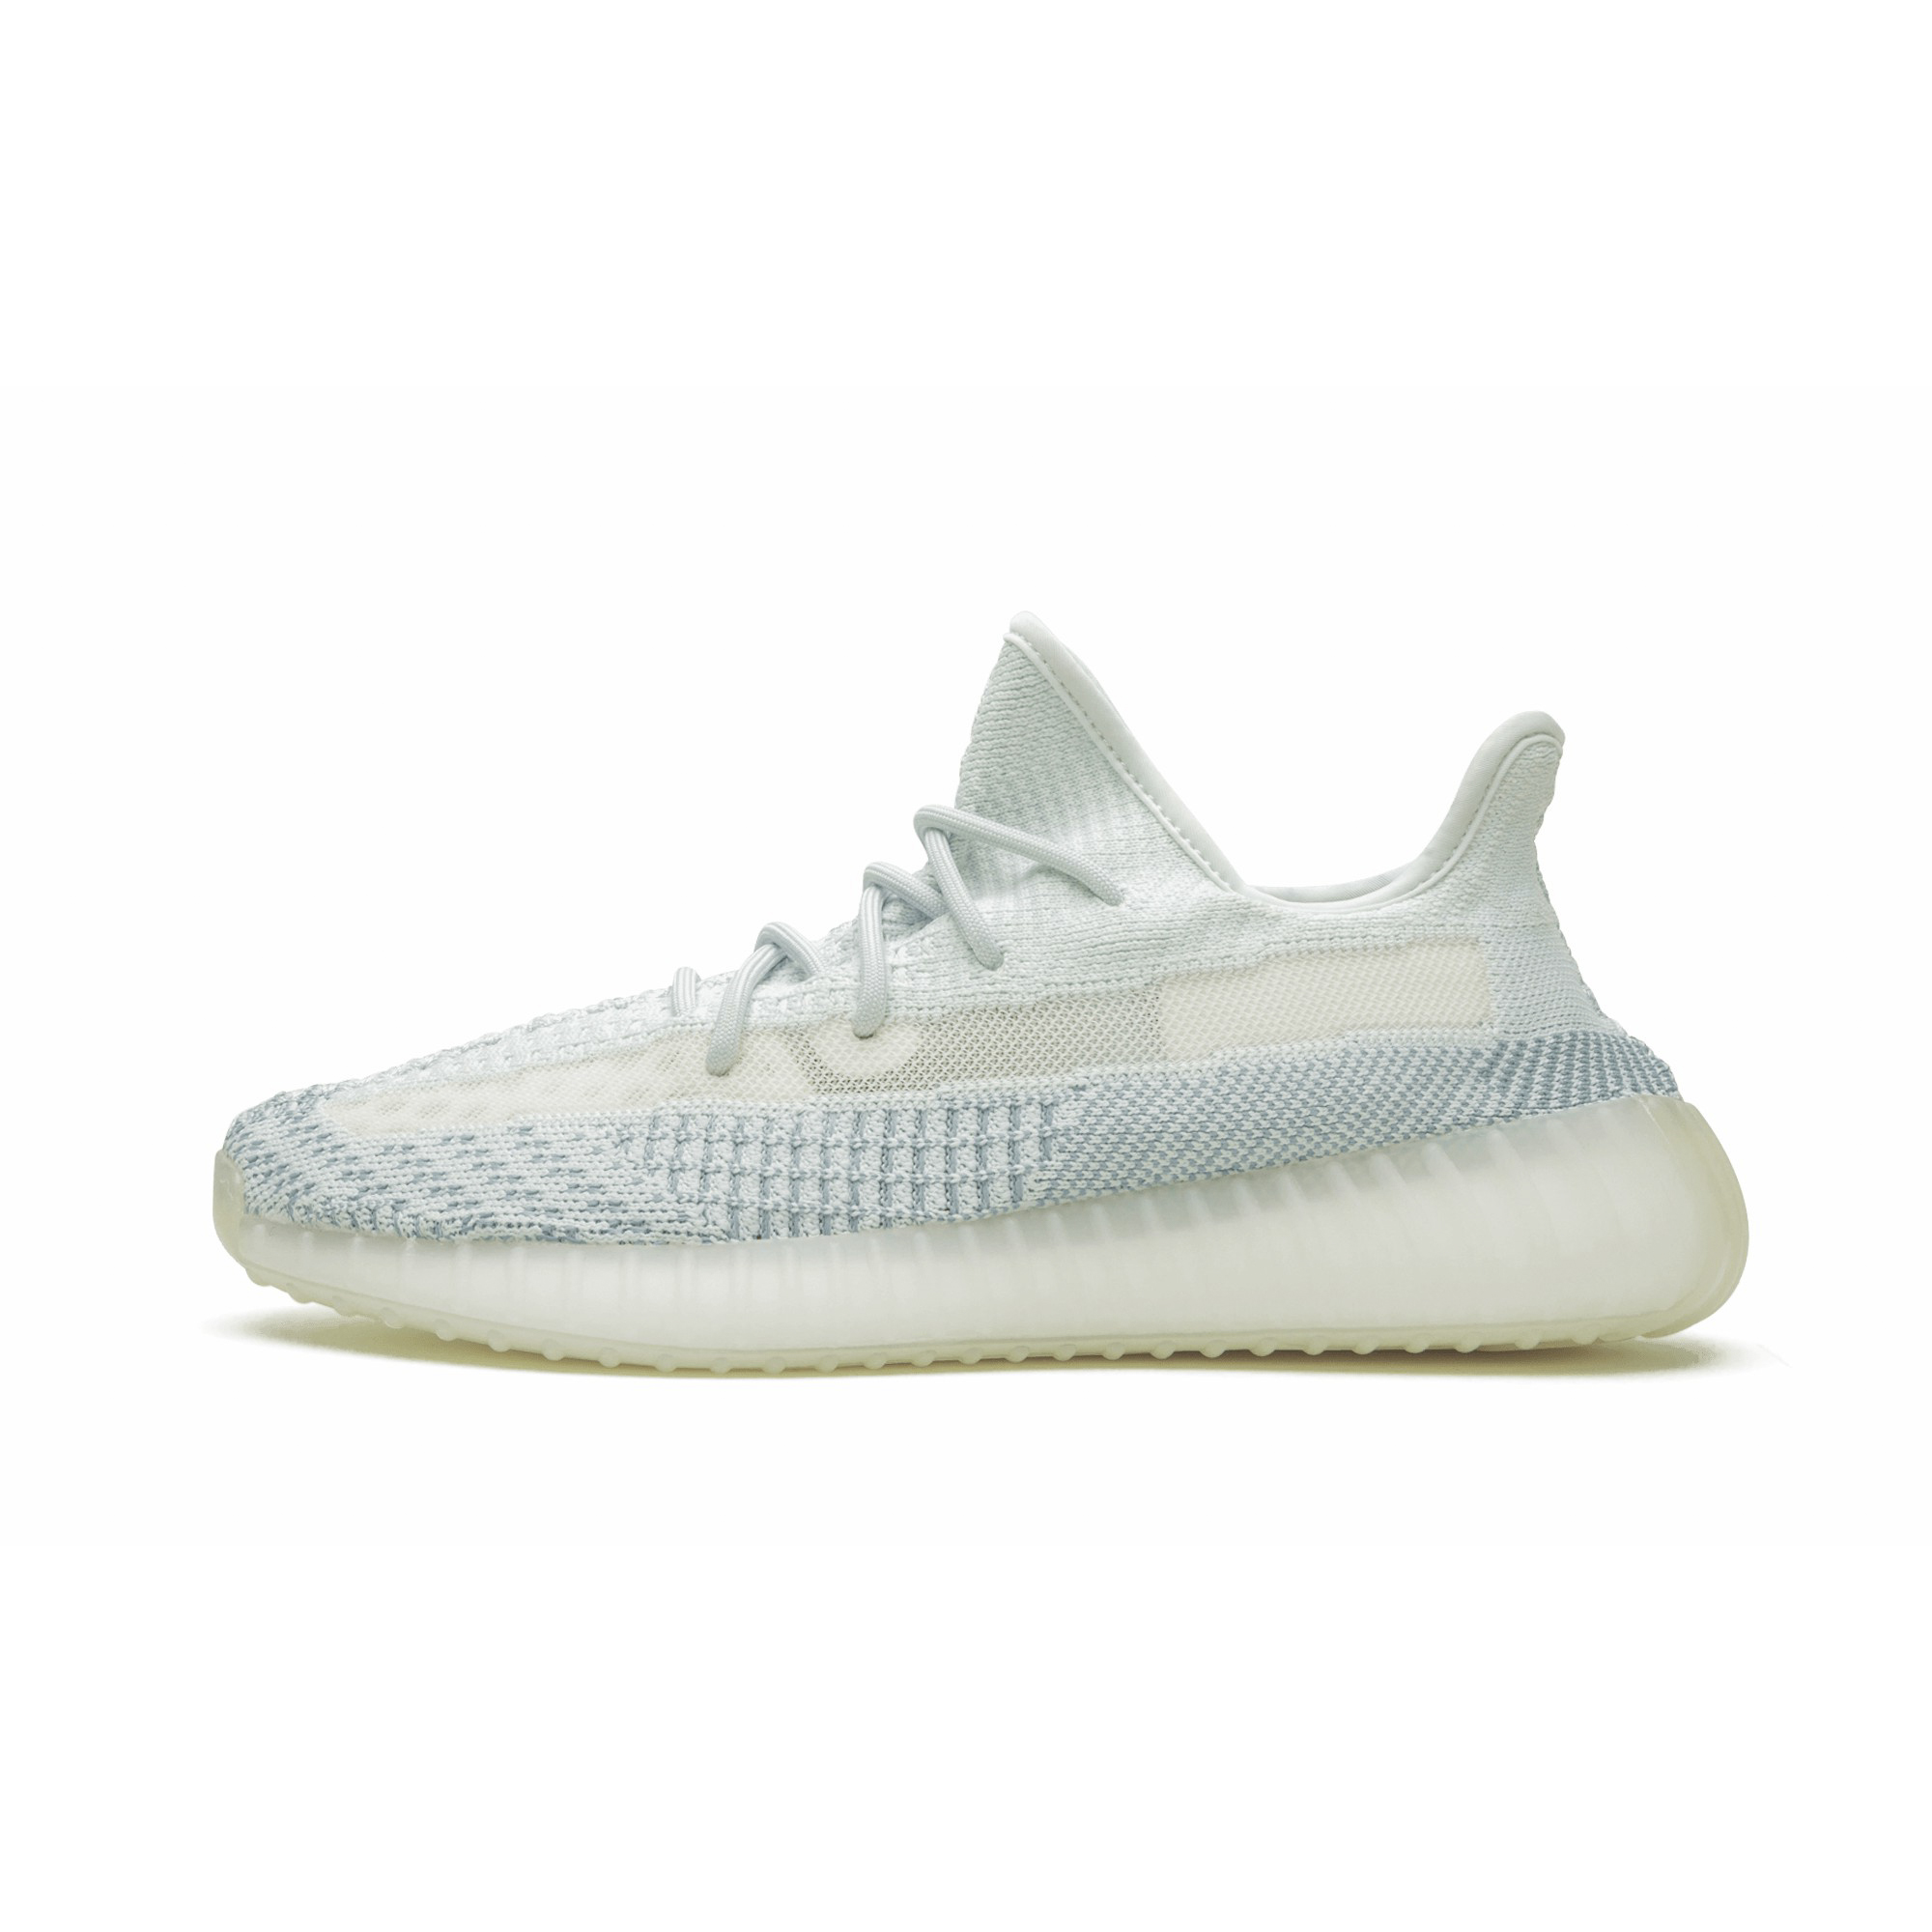 Yeezy 350 Boost V2 Cloud White